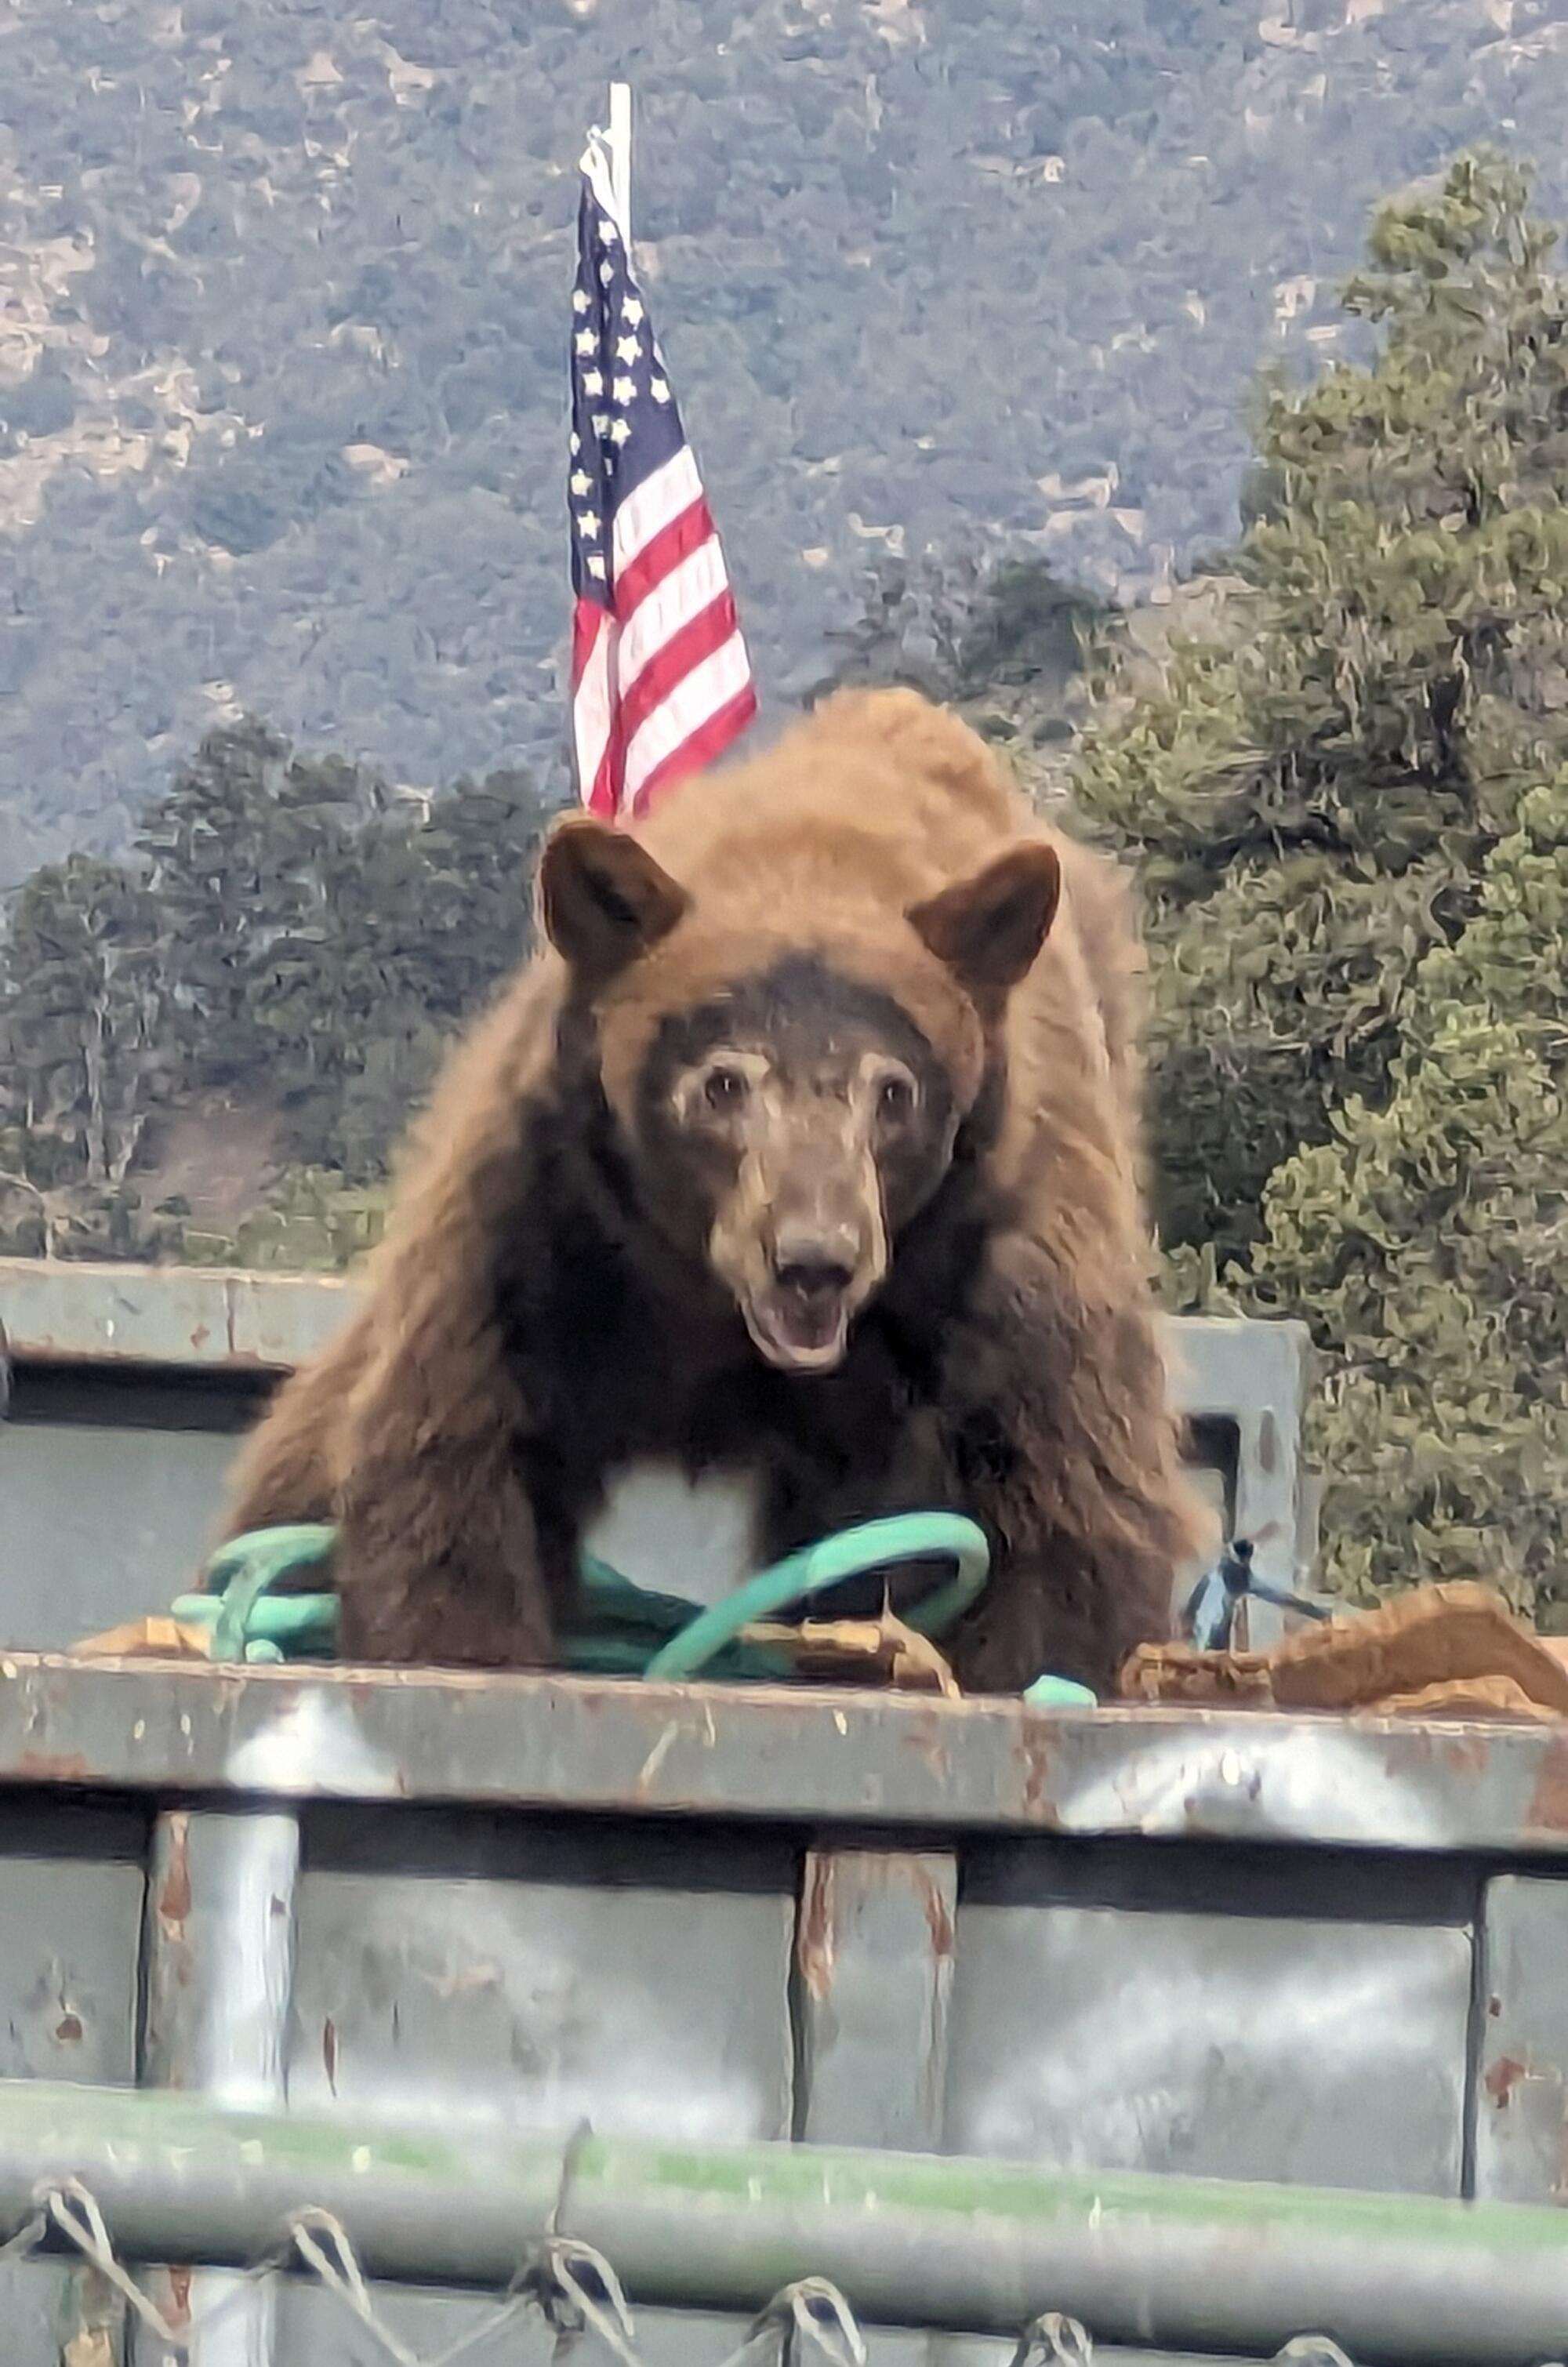 A brown bear atop a dumpster, with a U.S. flag and mountains in the background